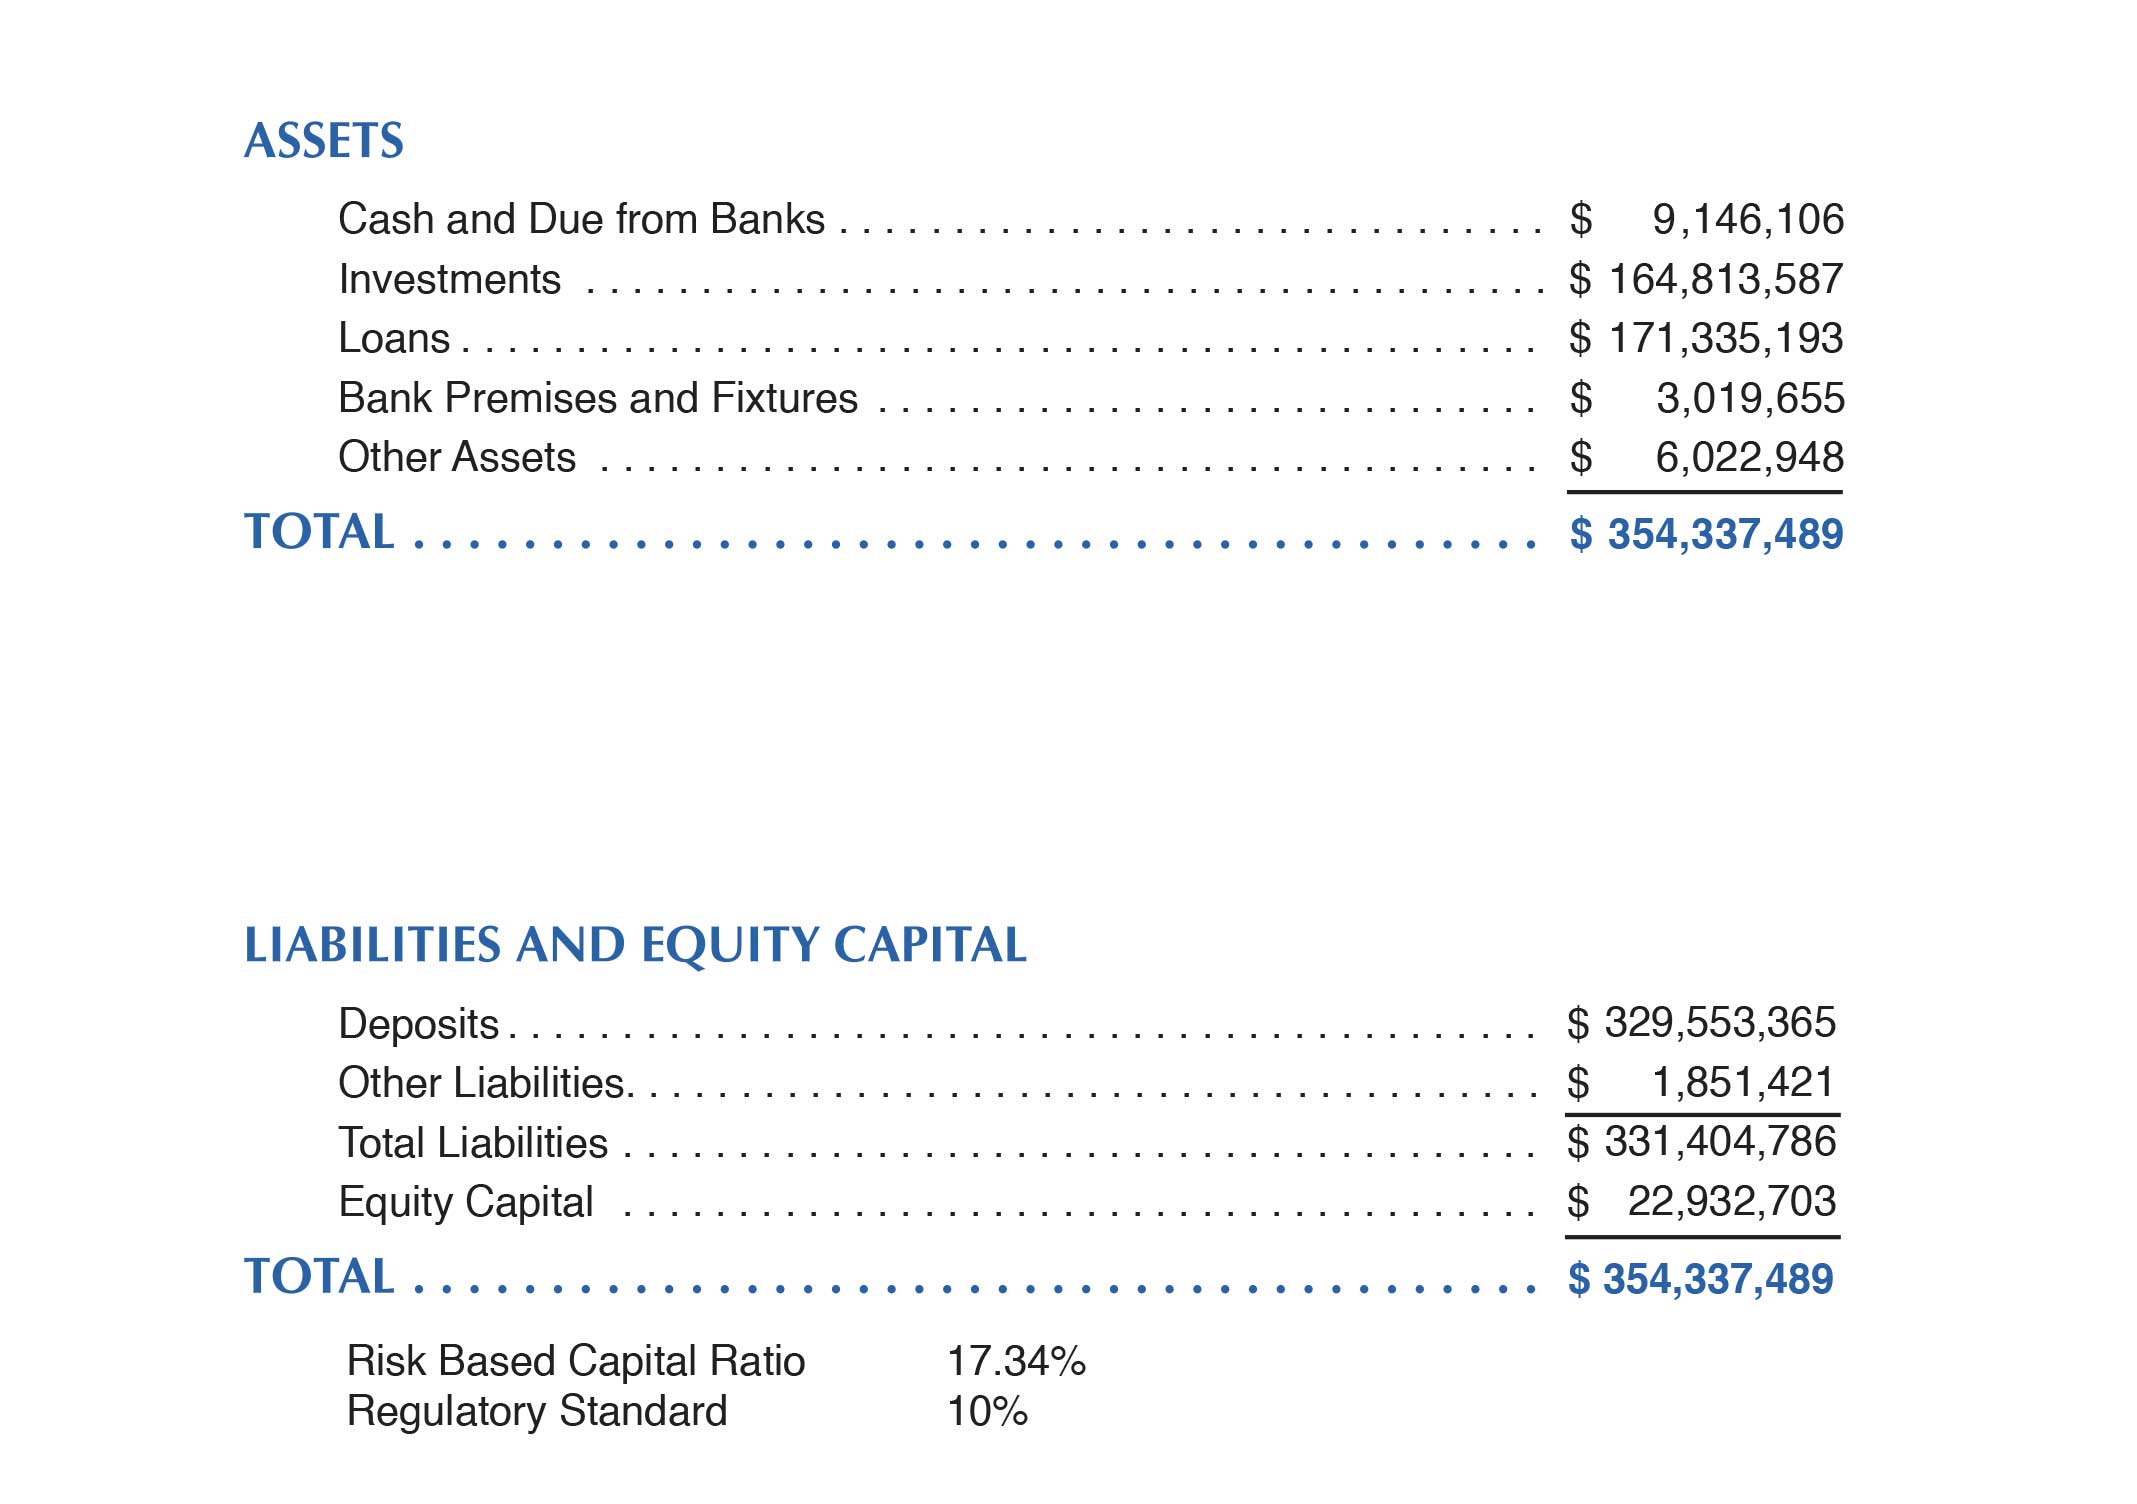 This contains a listing of Commercial Bank's assets, liabilities and equity capital